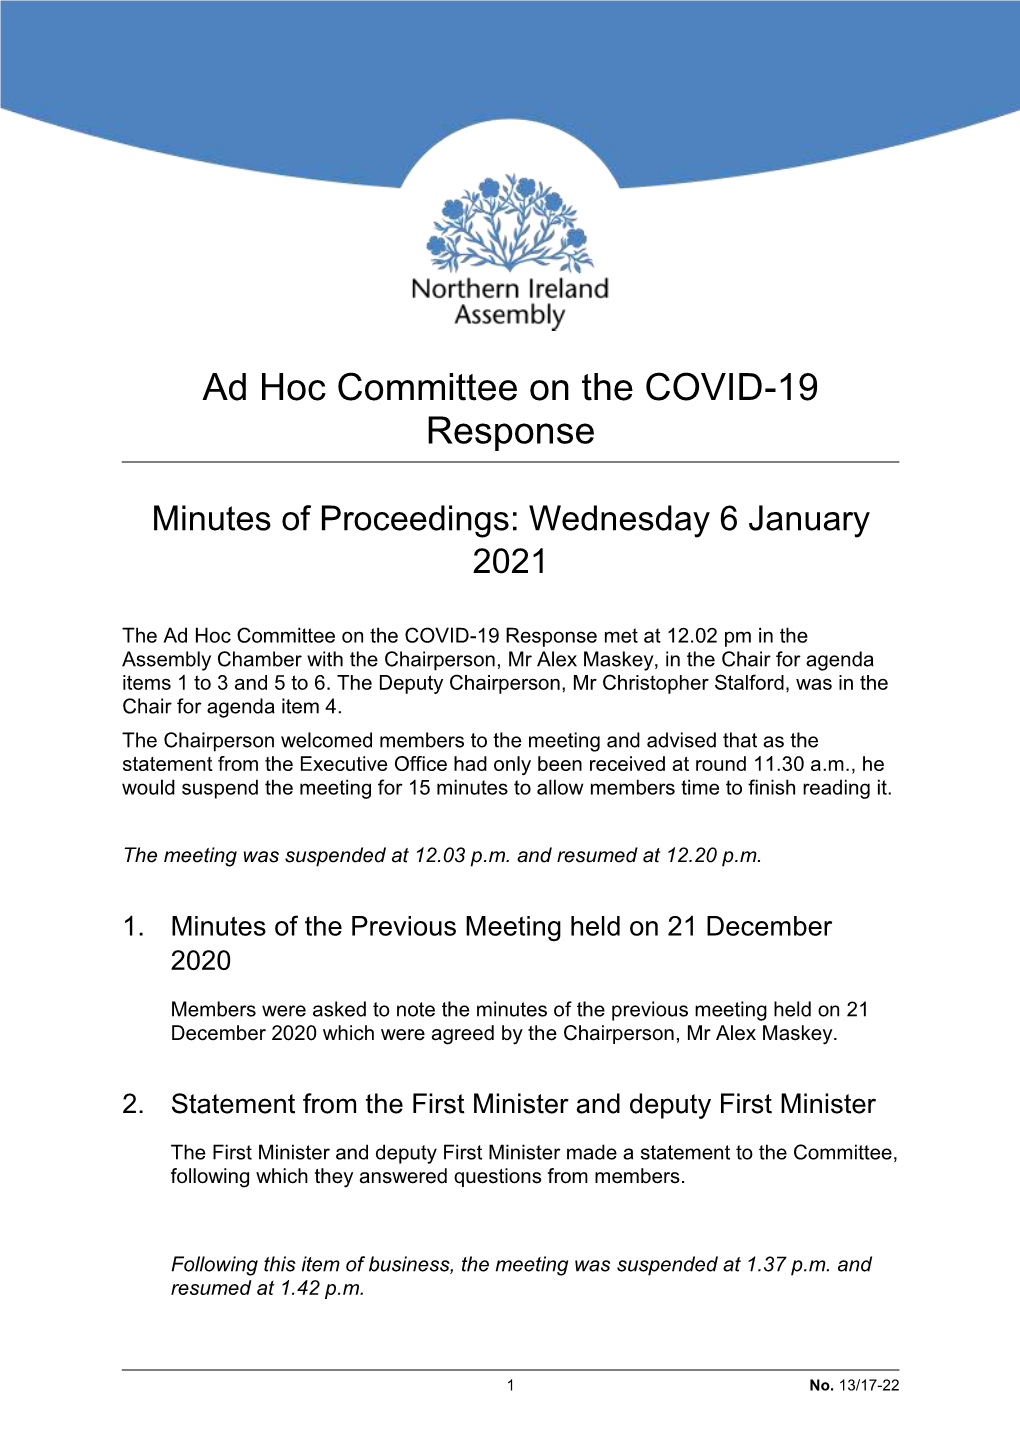 Ad Hoc Committee on the COVID-19 Response Meeting Minutes of Proceedings